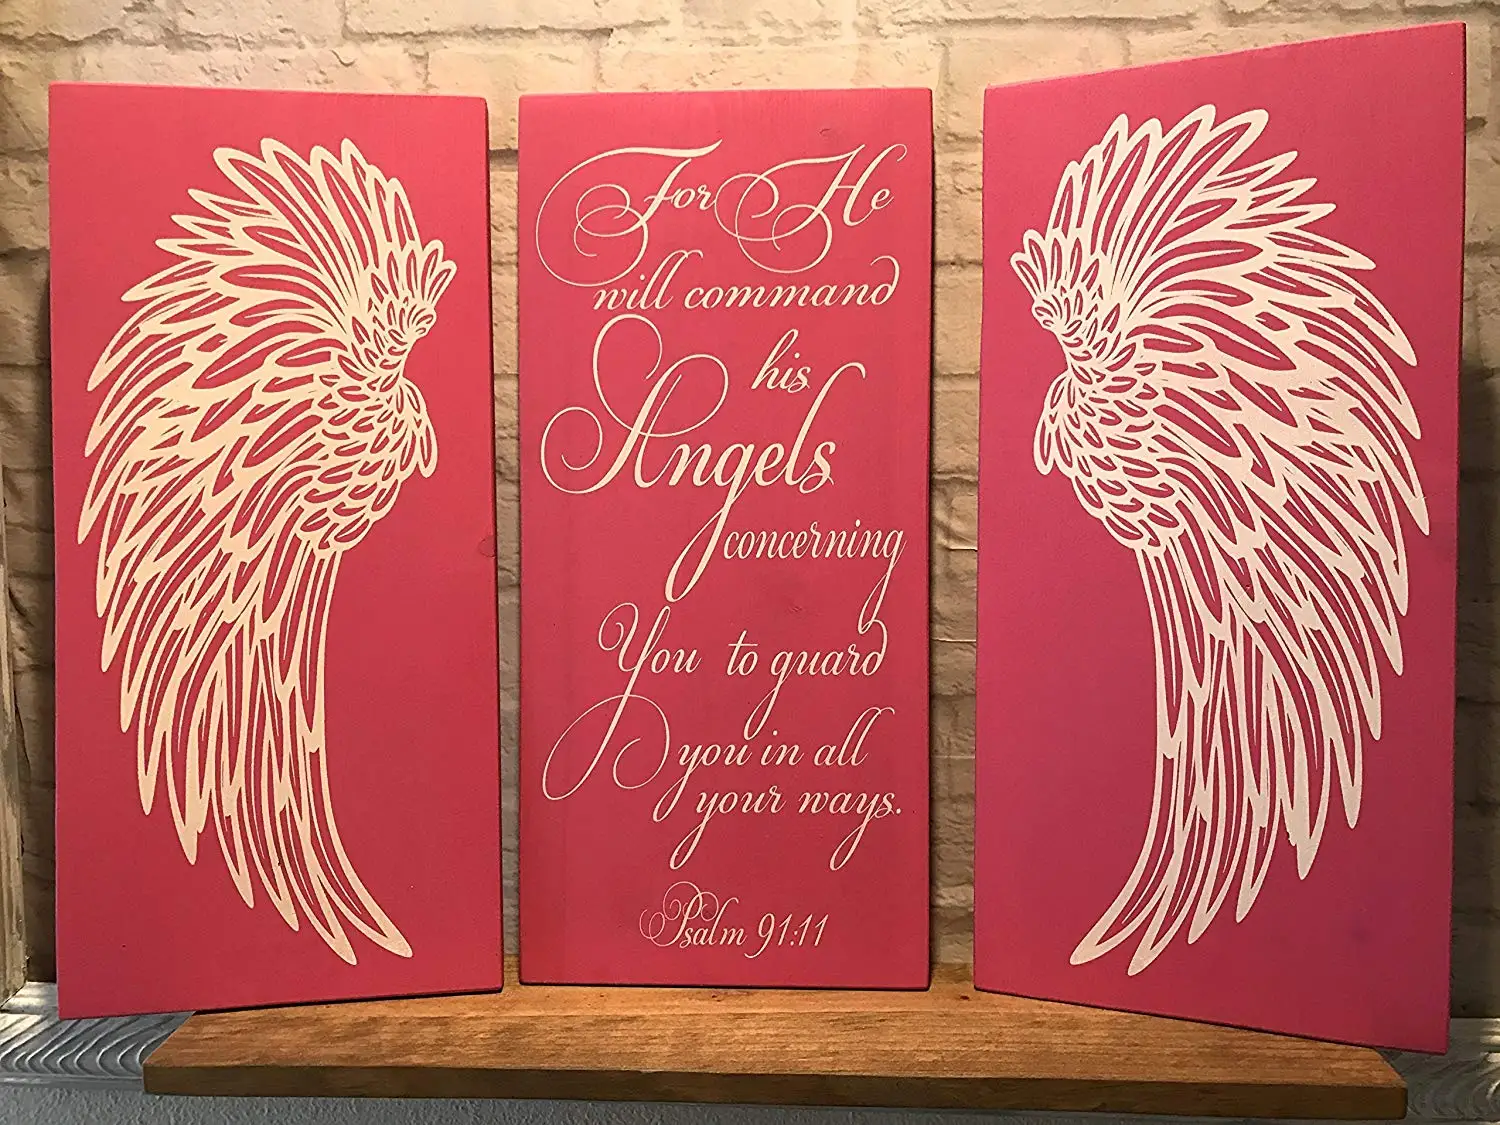 Buy Psalm 91 11 Vinyl Wall Art For He Will Command His Angels Concerning You To Guard You In All Your Ways In Cheap Price On Alibaba Com